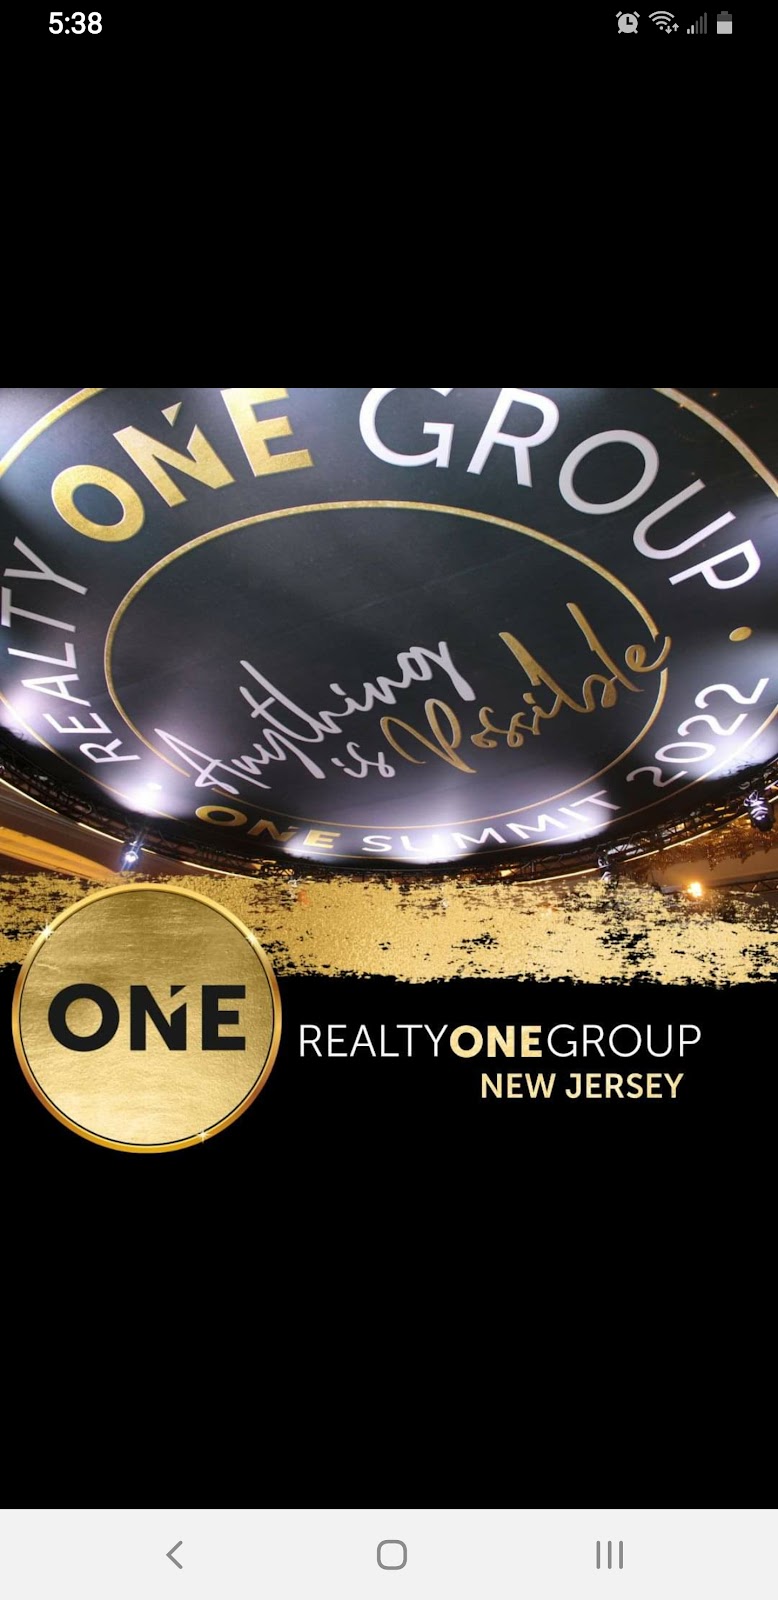 Realty ONE Group Lifestyle Homes | 425 N Ave E, Westfield, NJ 07090 | Phone: (908) 291-1300